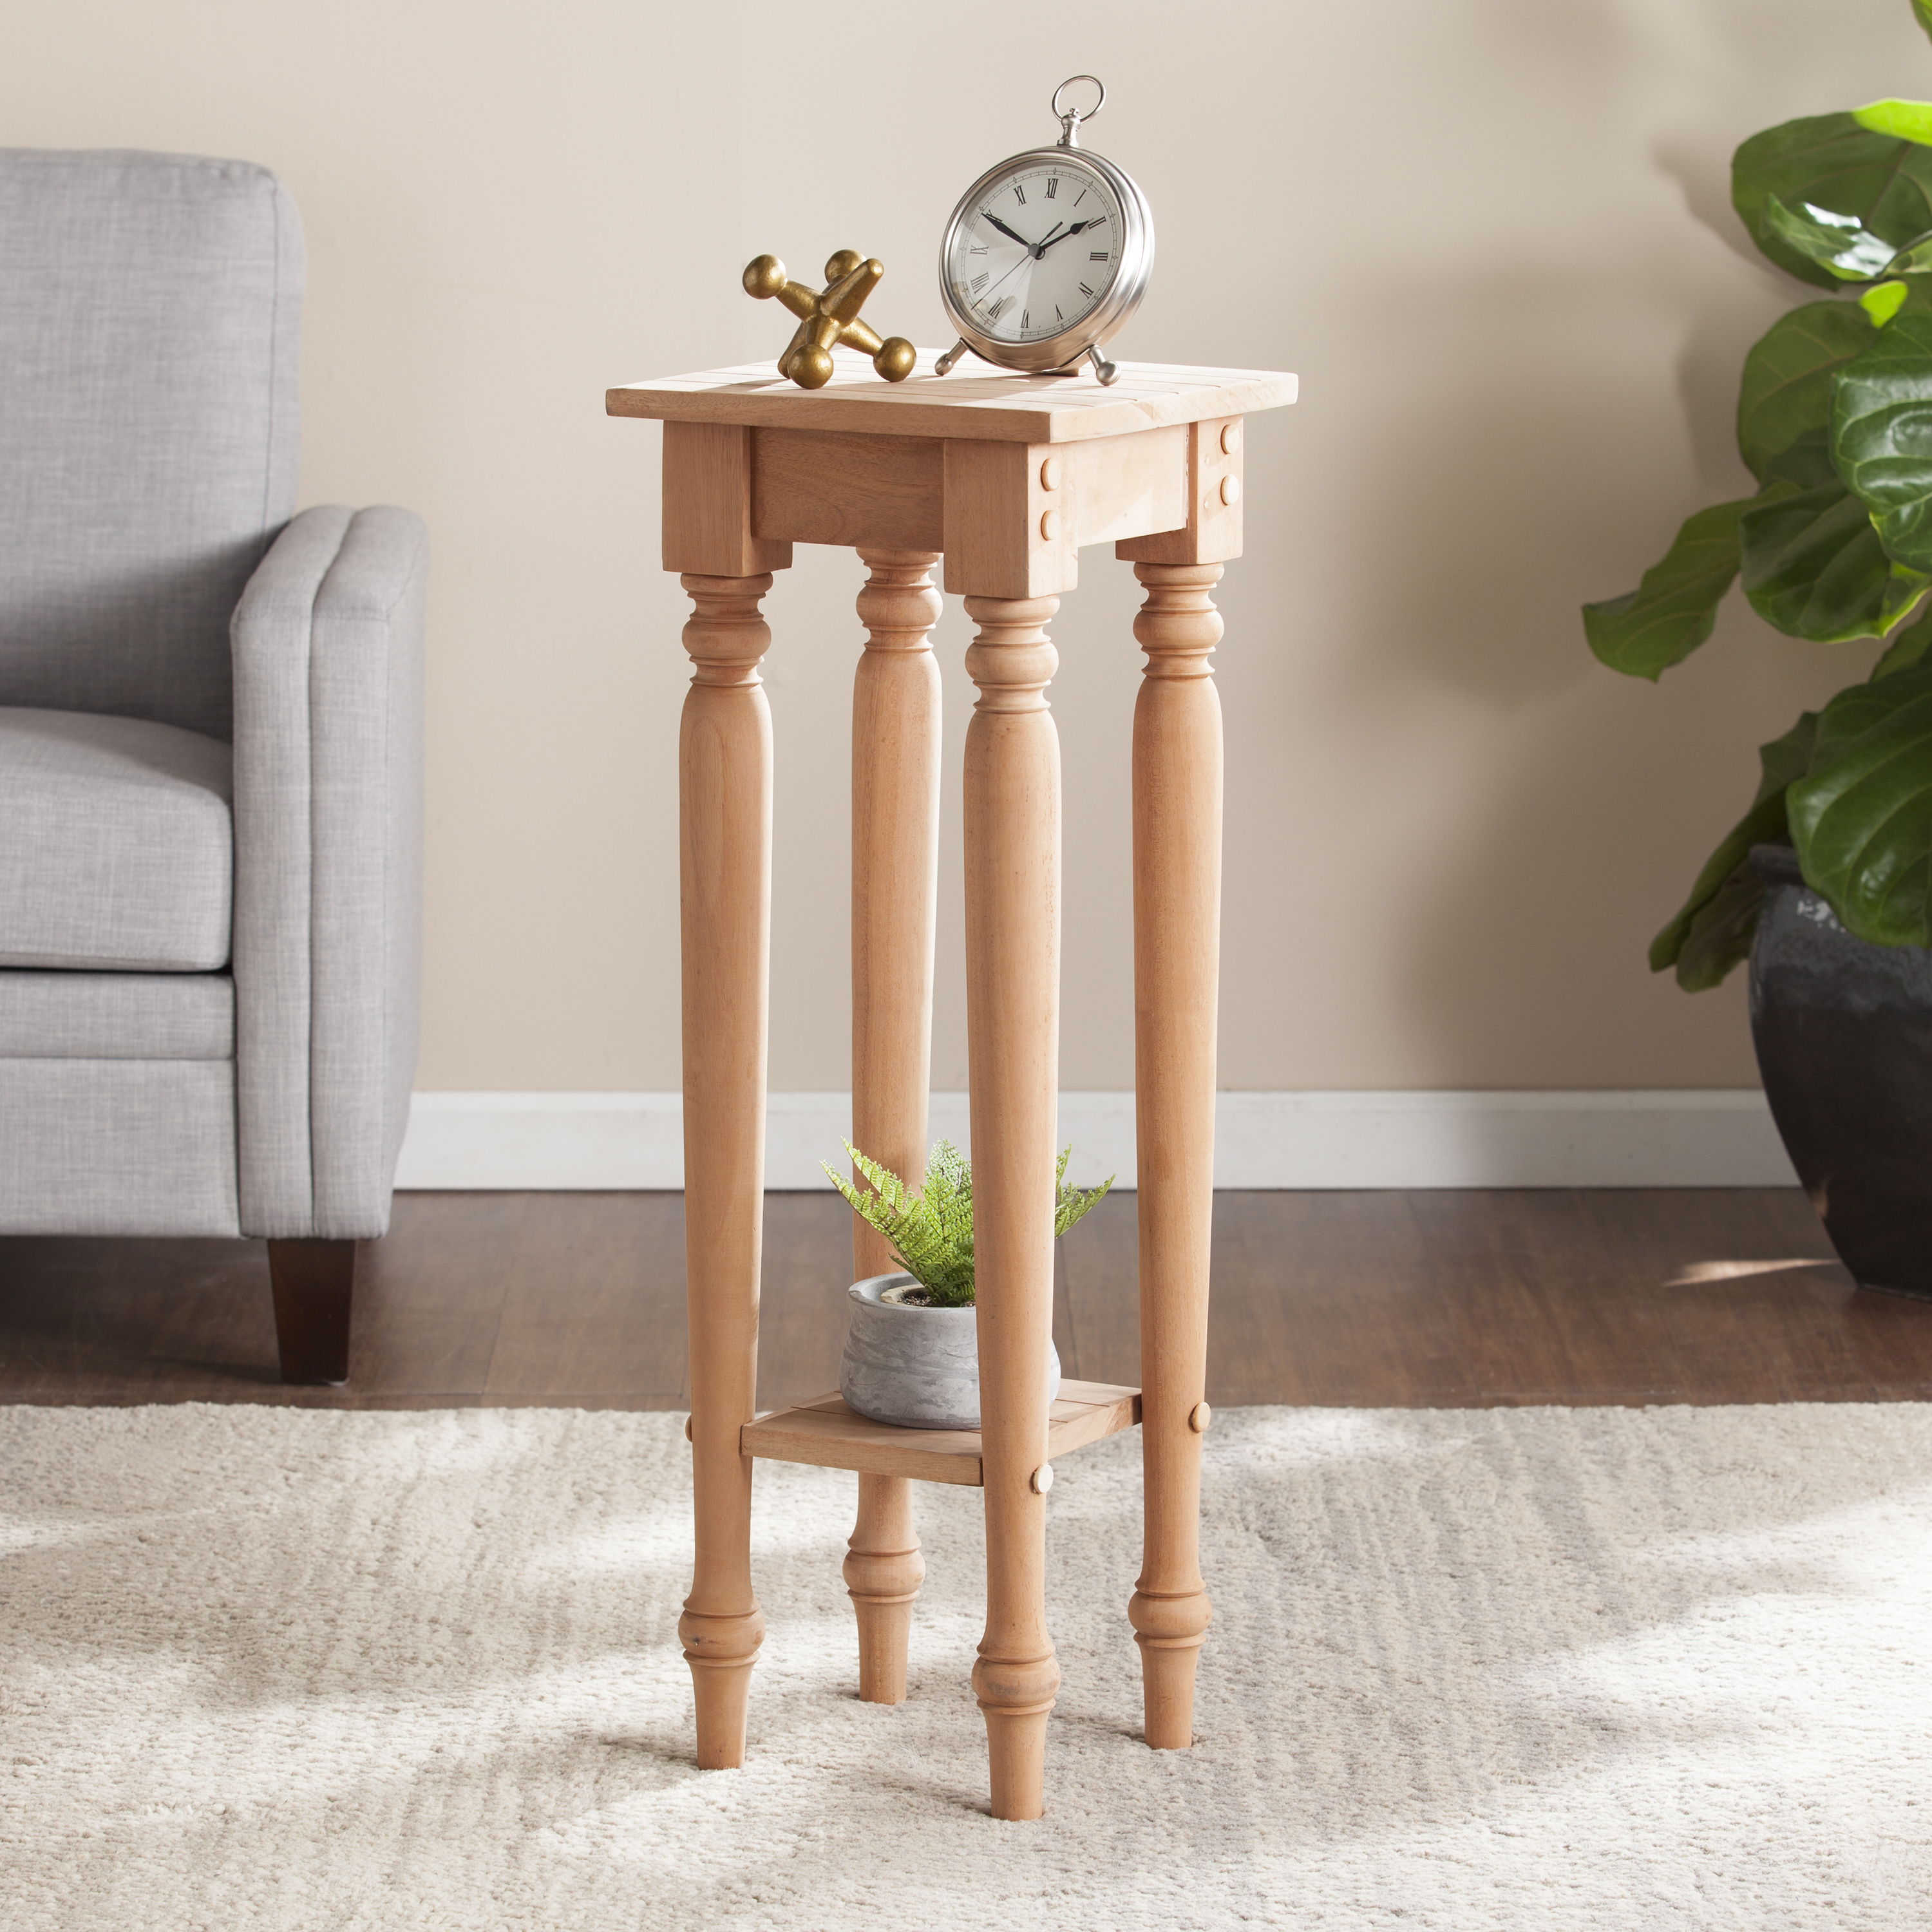 harwich unfinished wood accent table southern enterprises inc nest tables rafferty end ashley furniture huge wall clock target patio rectangular mosaic mission wide oak threshold